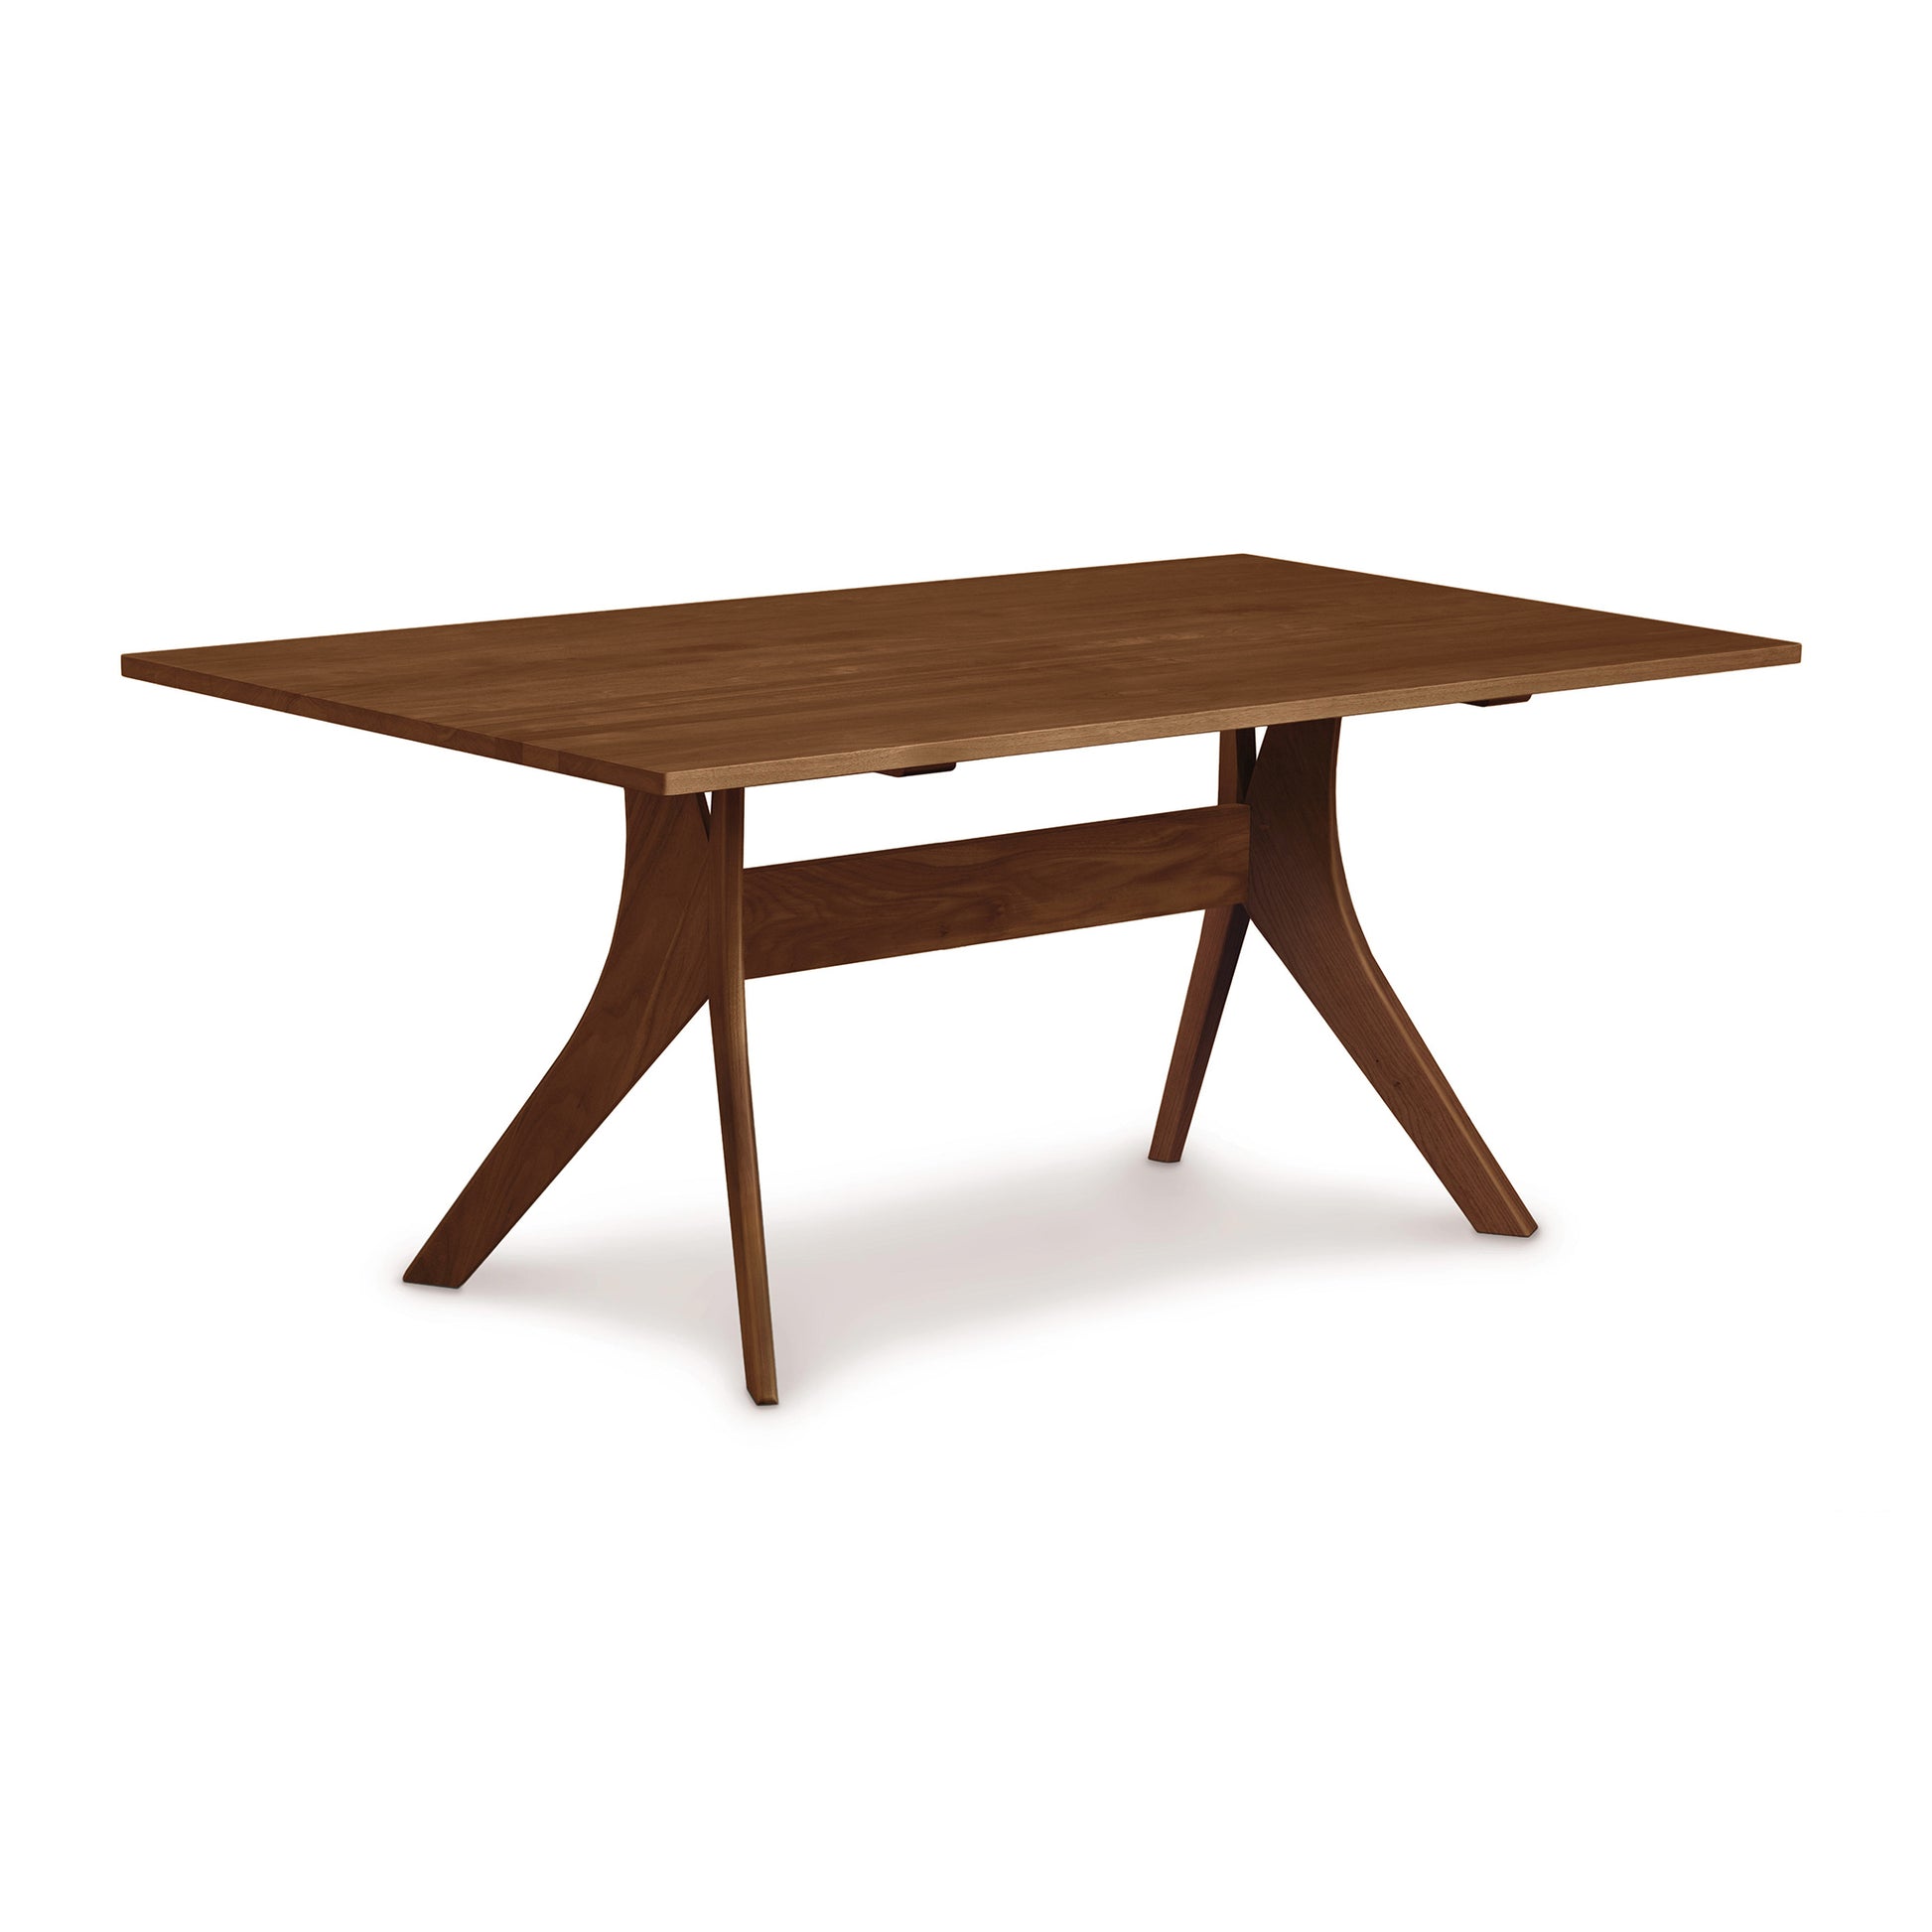 A handmade Copeland Furniture Audrey Solid Top Dining Table with a rectangular hardwood top and an x-shaped leg base on a plain white background.